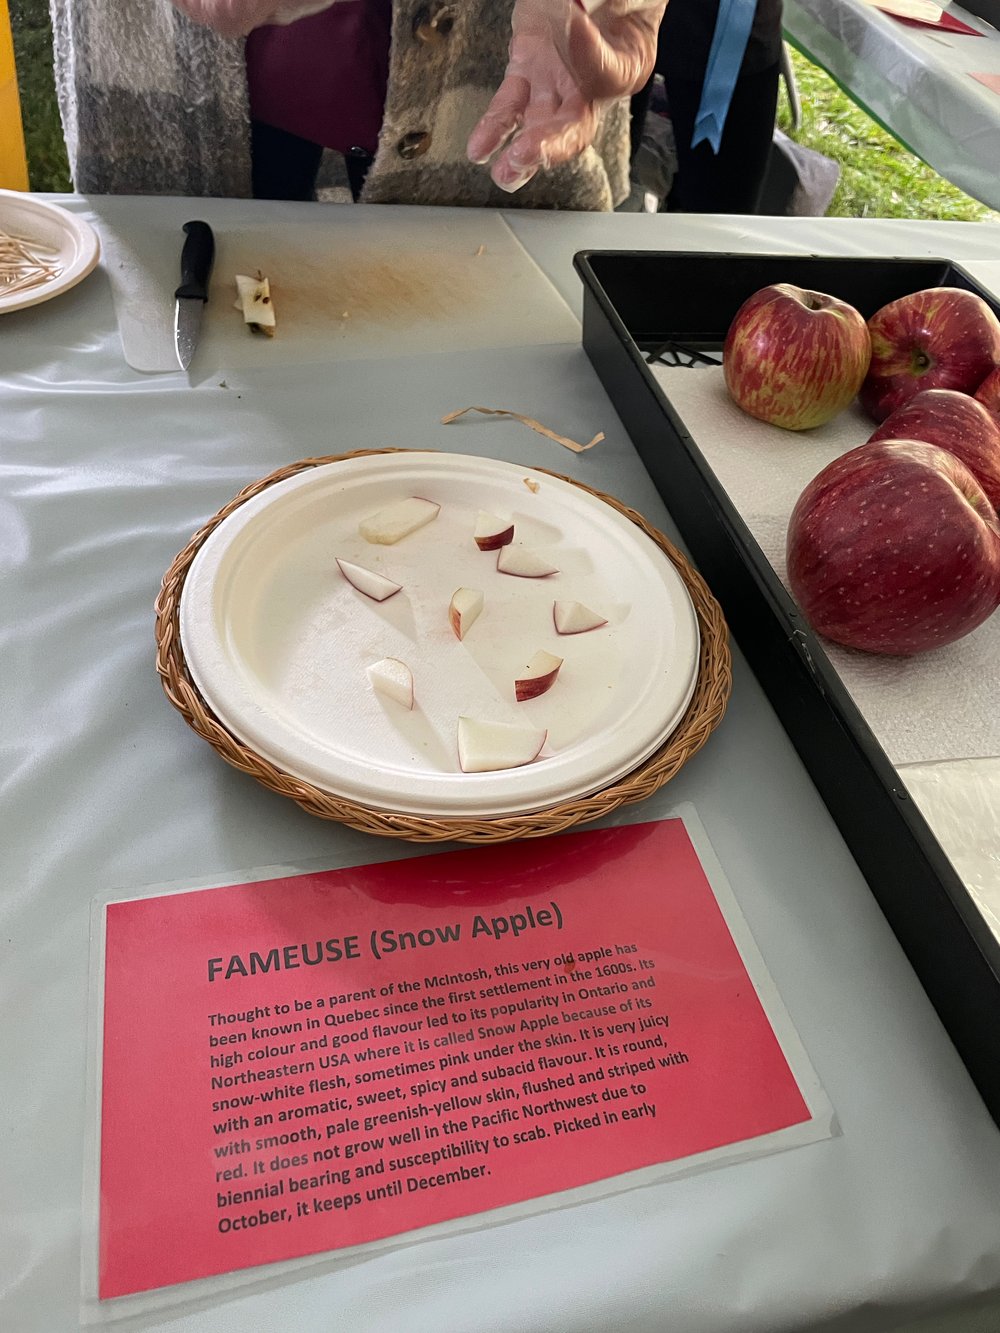  The Fameuse or Snow Apple, with white flesh and deep red skin. Small pieces of this apple sit on a plate next to a few whole apples and an information card about the apple 